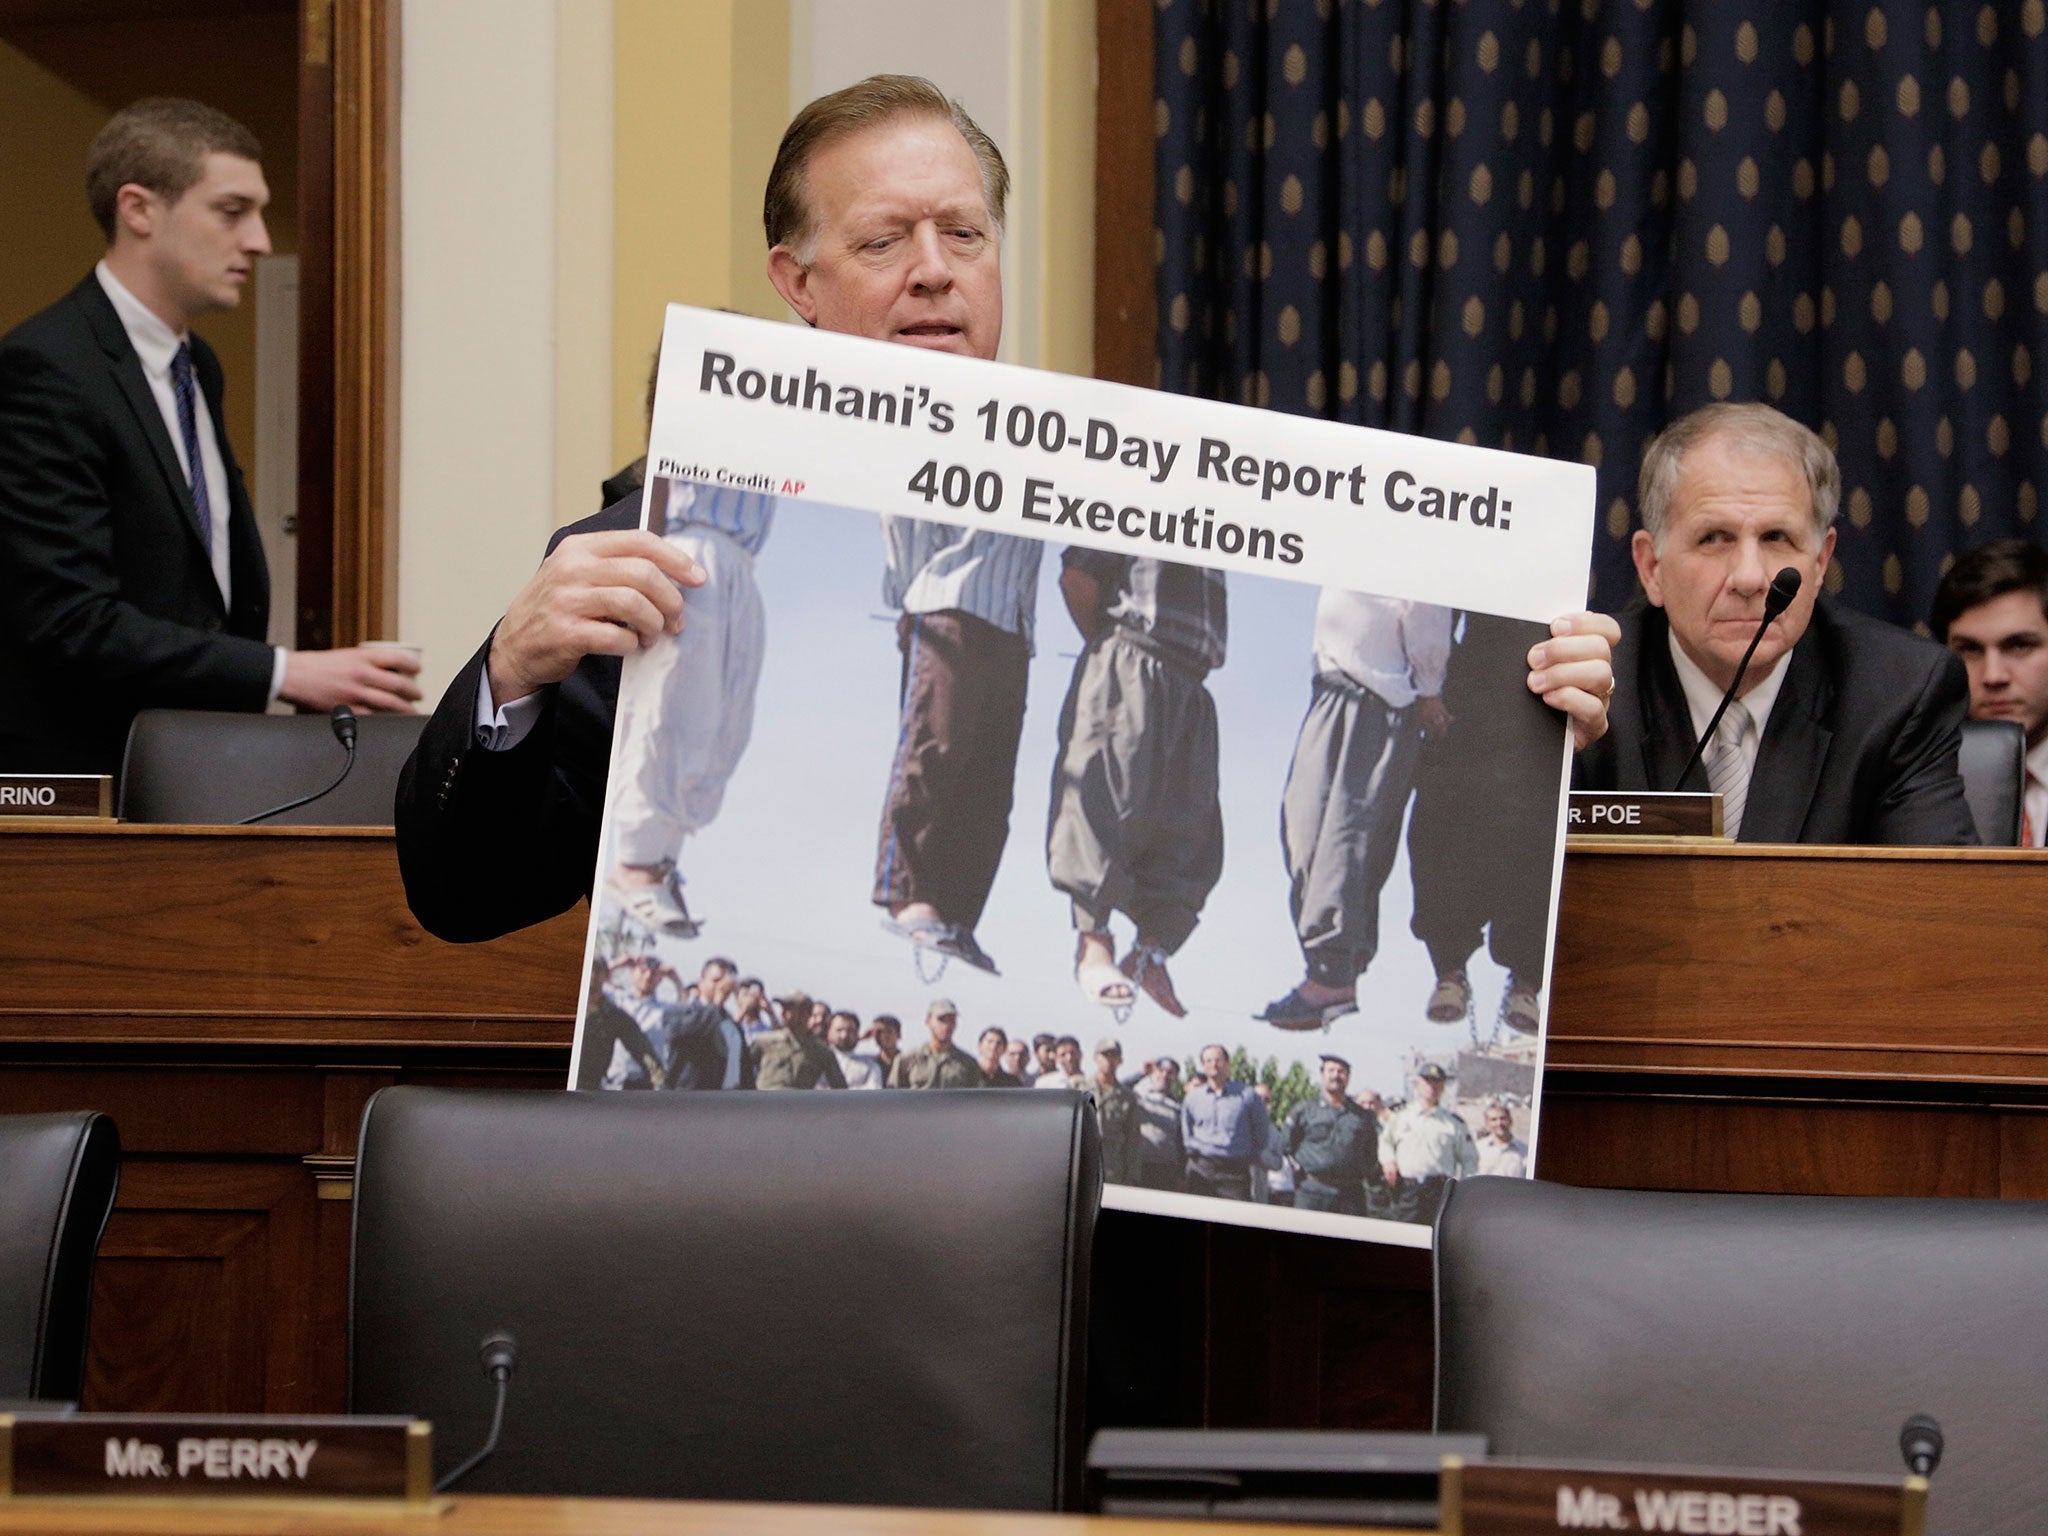 Randy Weber carrying a poster accusing Iranian President Hassan Rouhani of hundreds of executions at a House Foreign Affairs Committee hearing